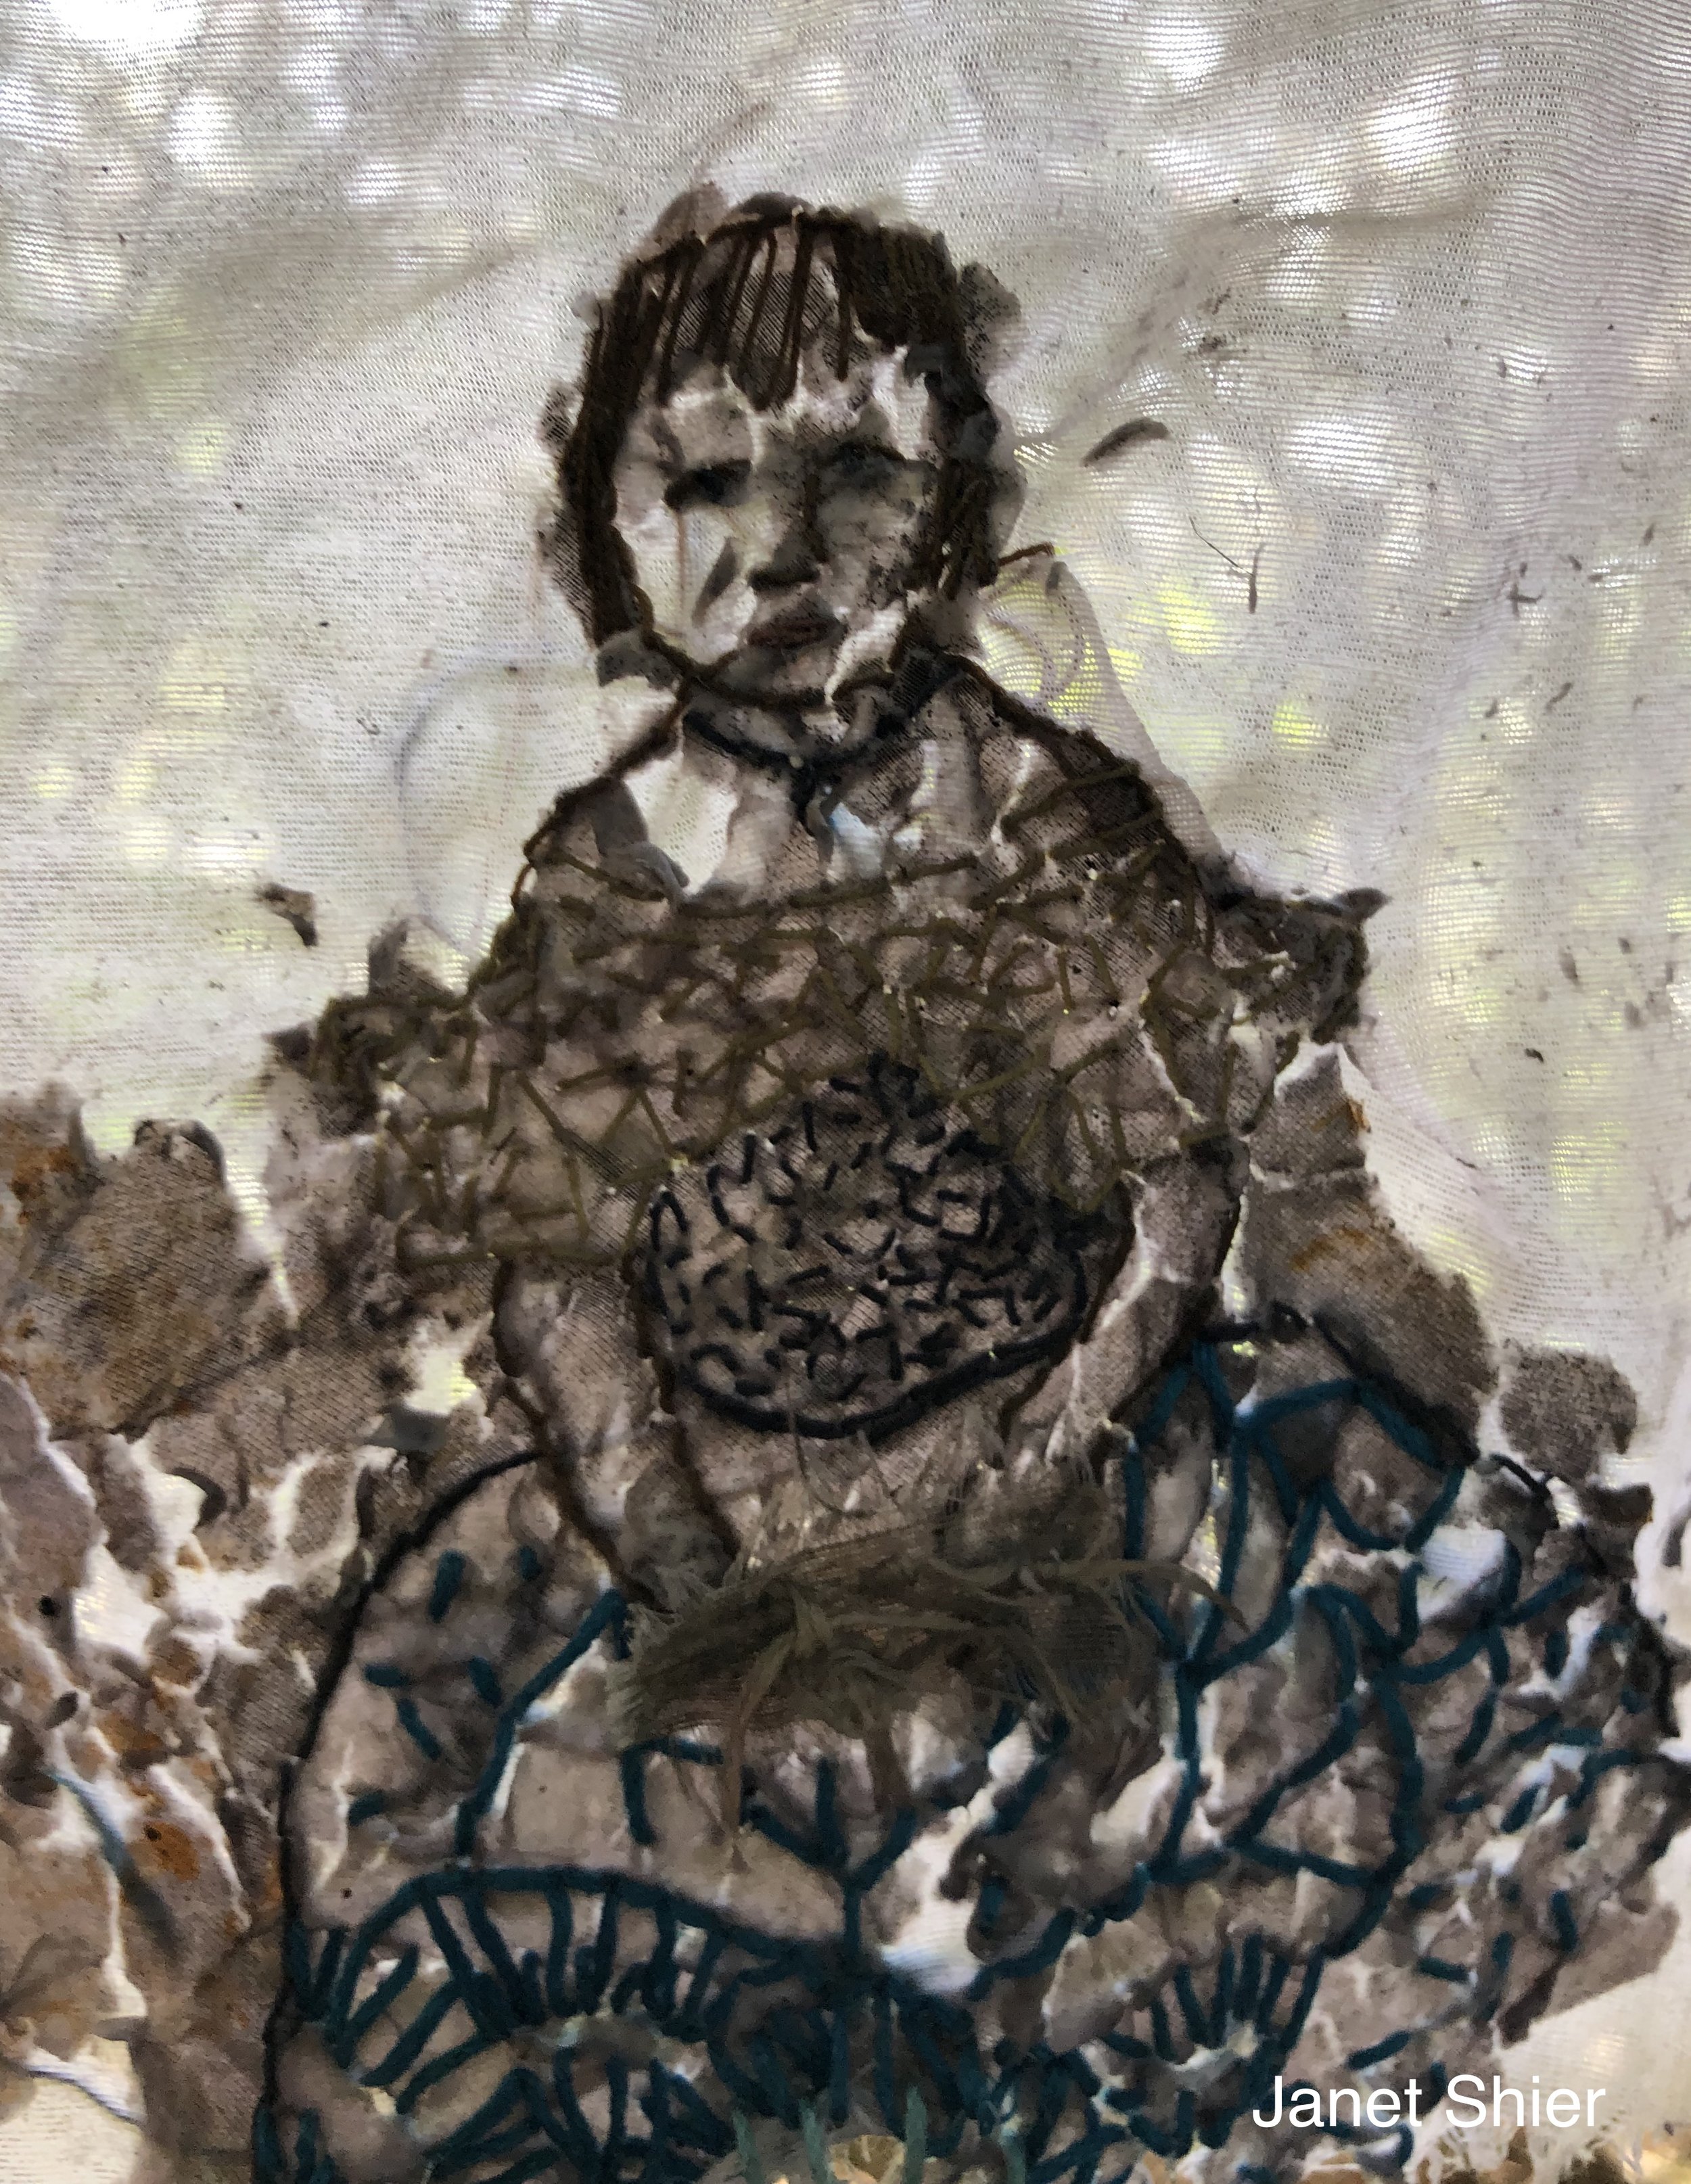 Self Portrait as child (embroidery, eco-dyed)